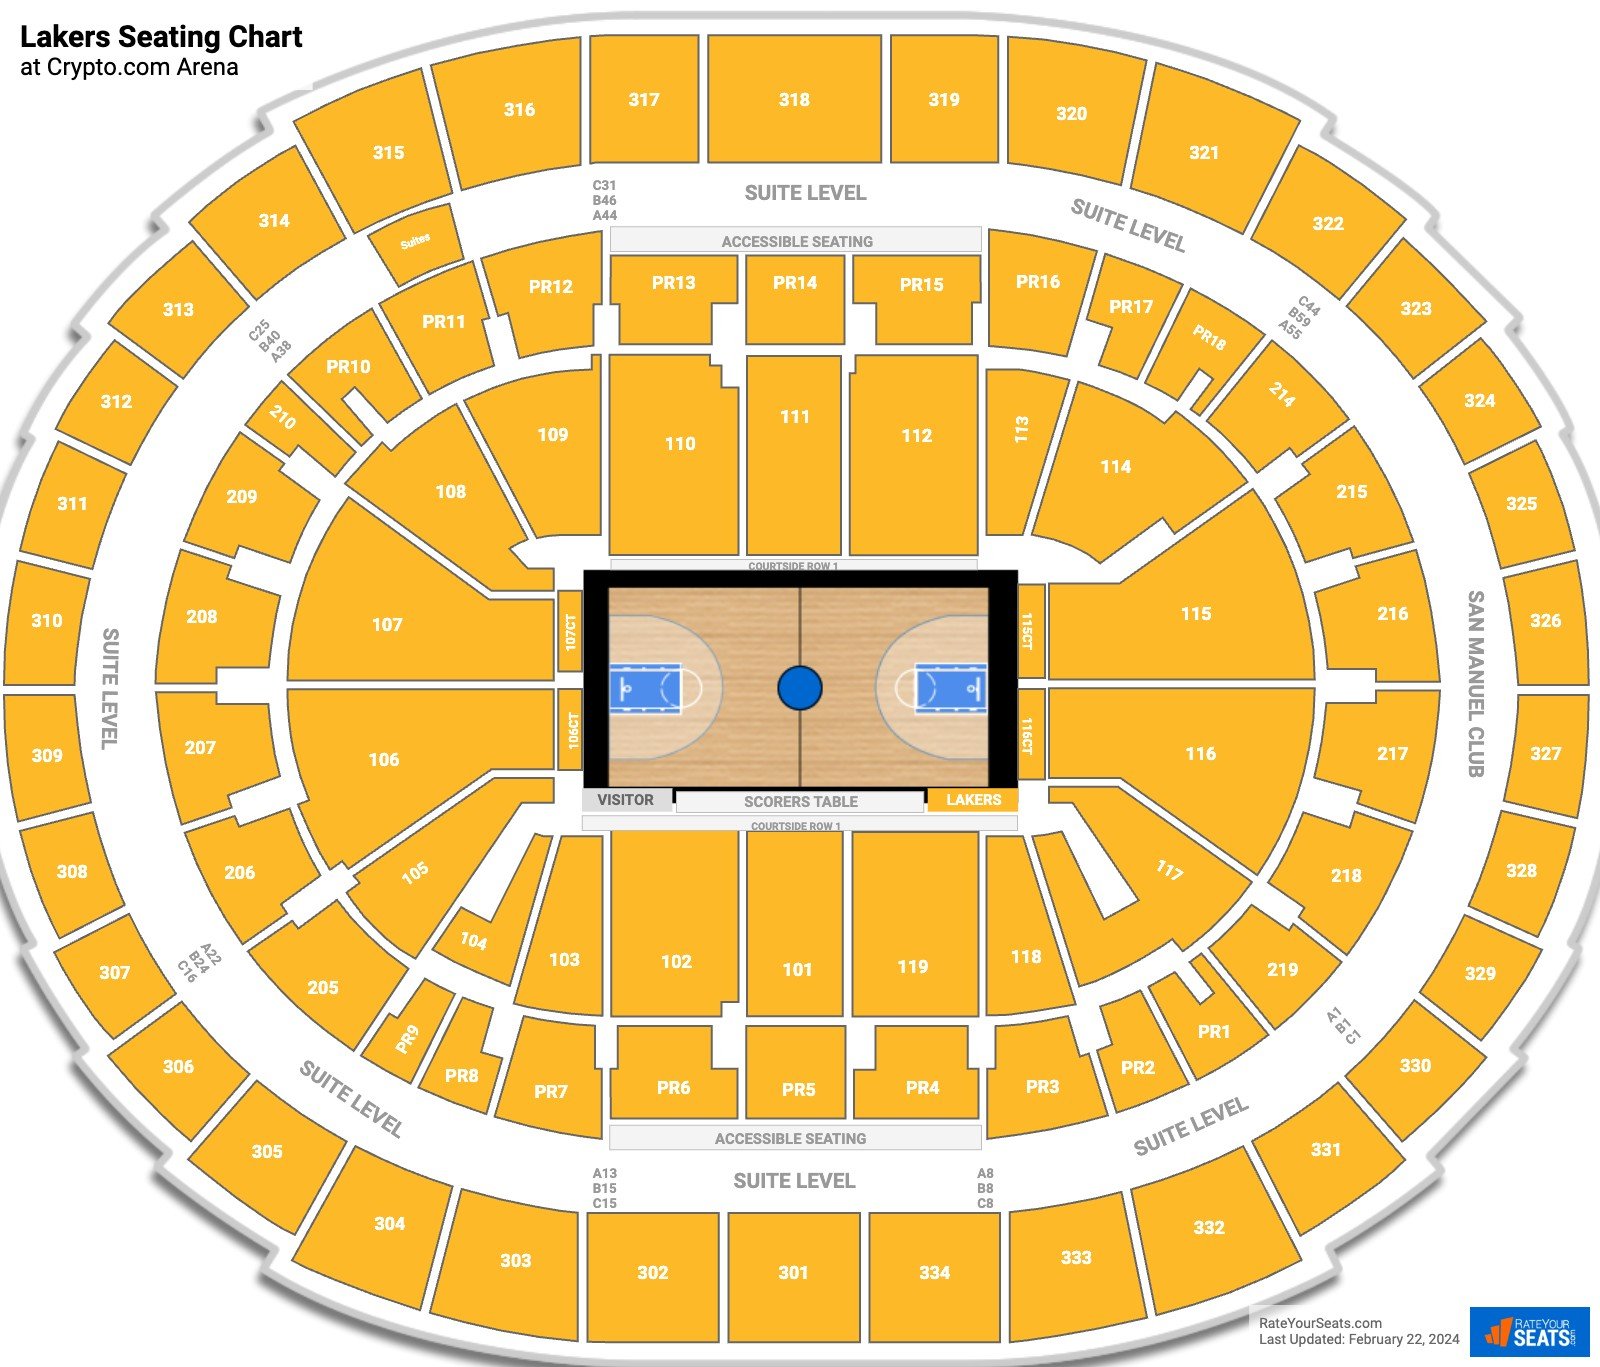 Staples Center Seating Chart Lakers